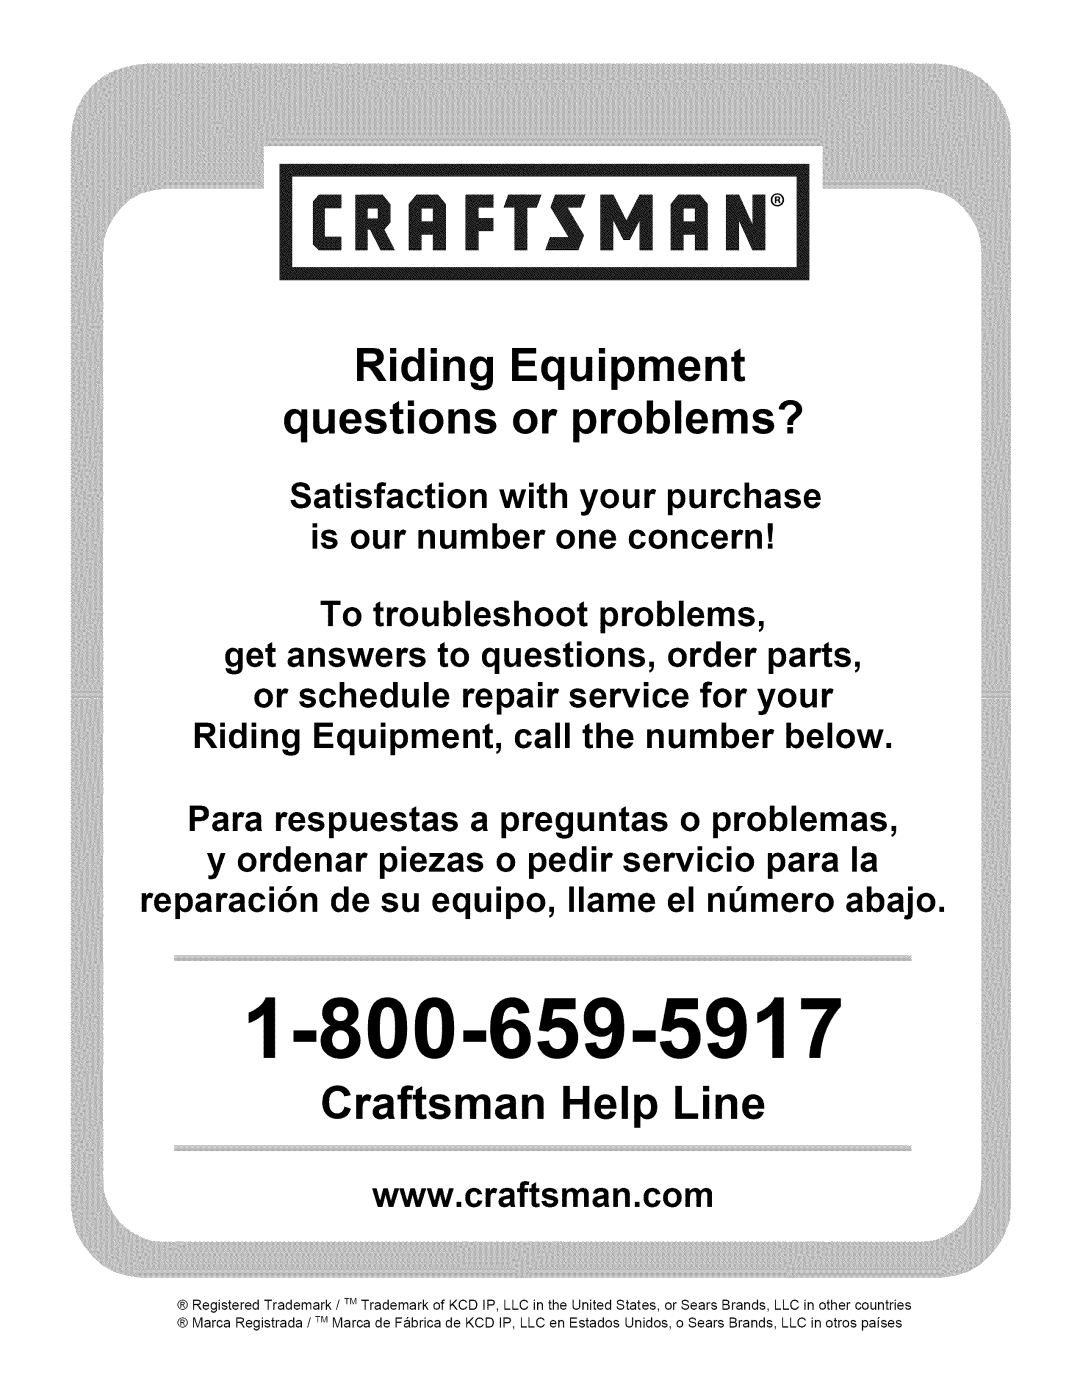 Craftsman PGT9000, 247.28984 manual Riding Equipment questions or problems?, Craftsman Help Line 